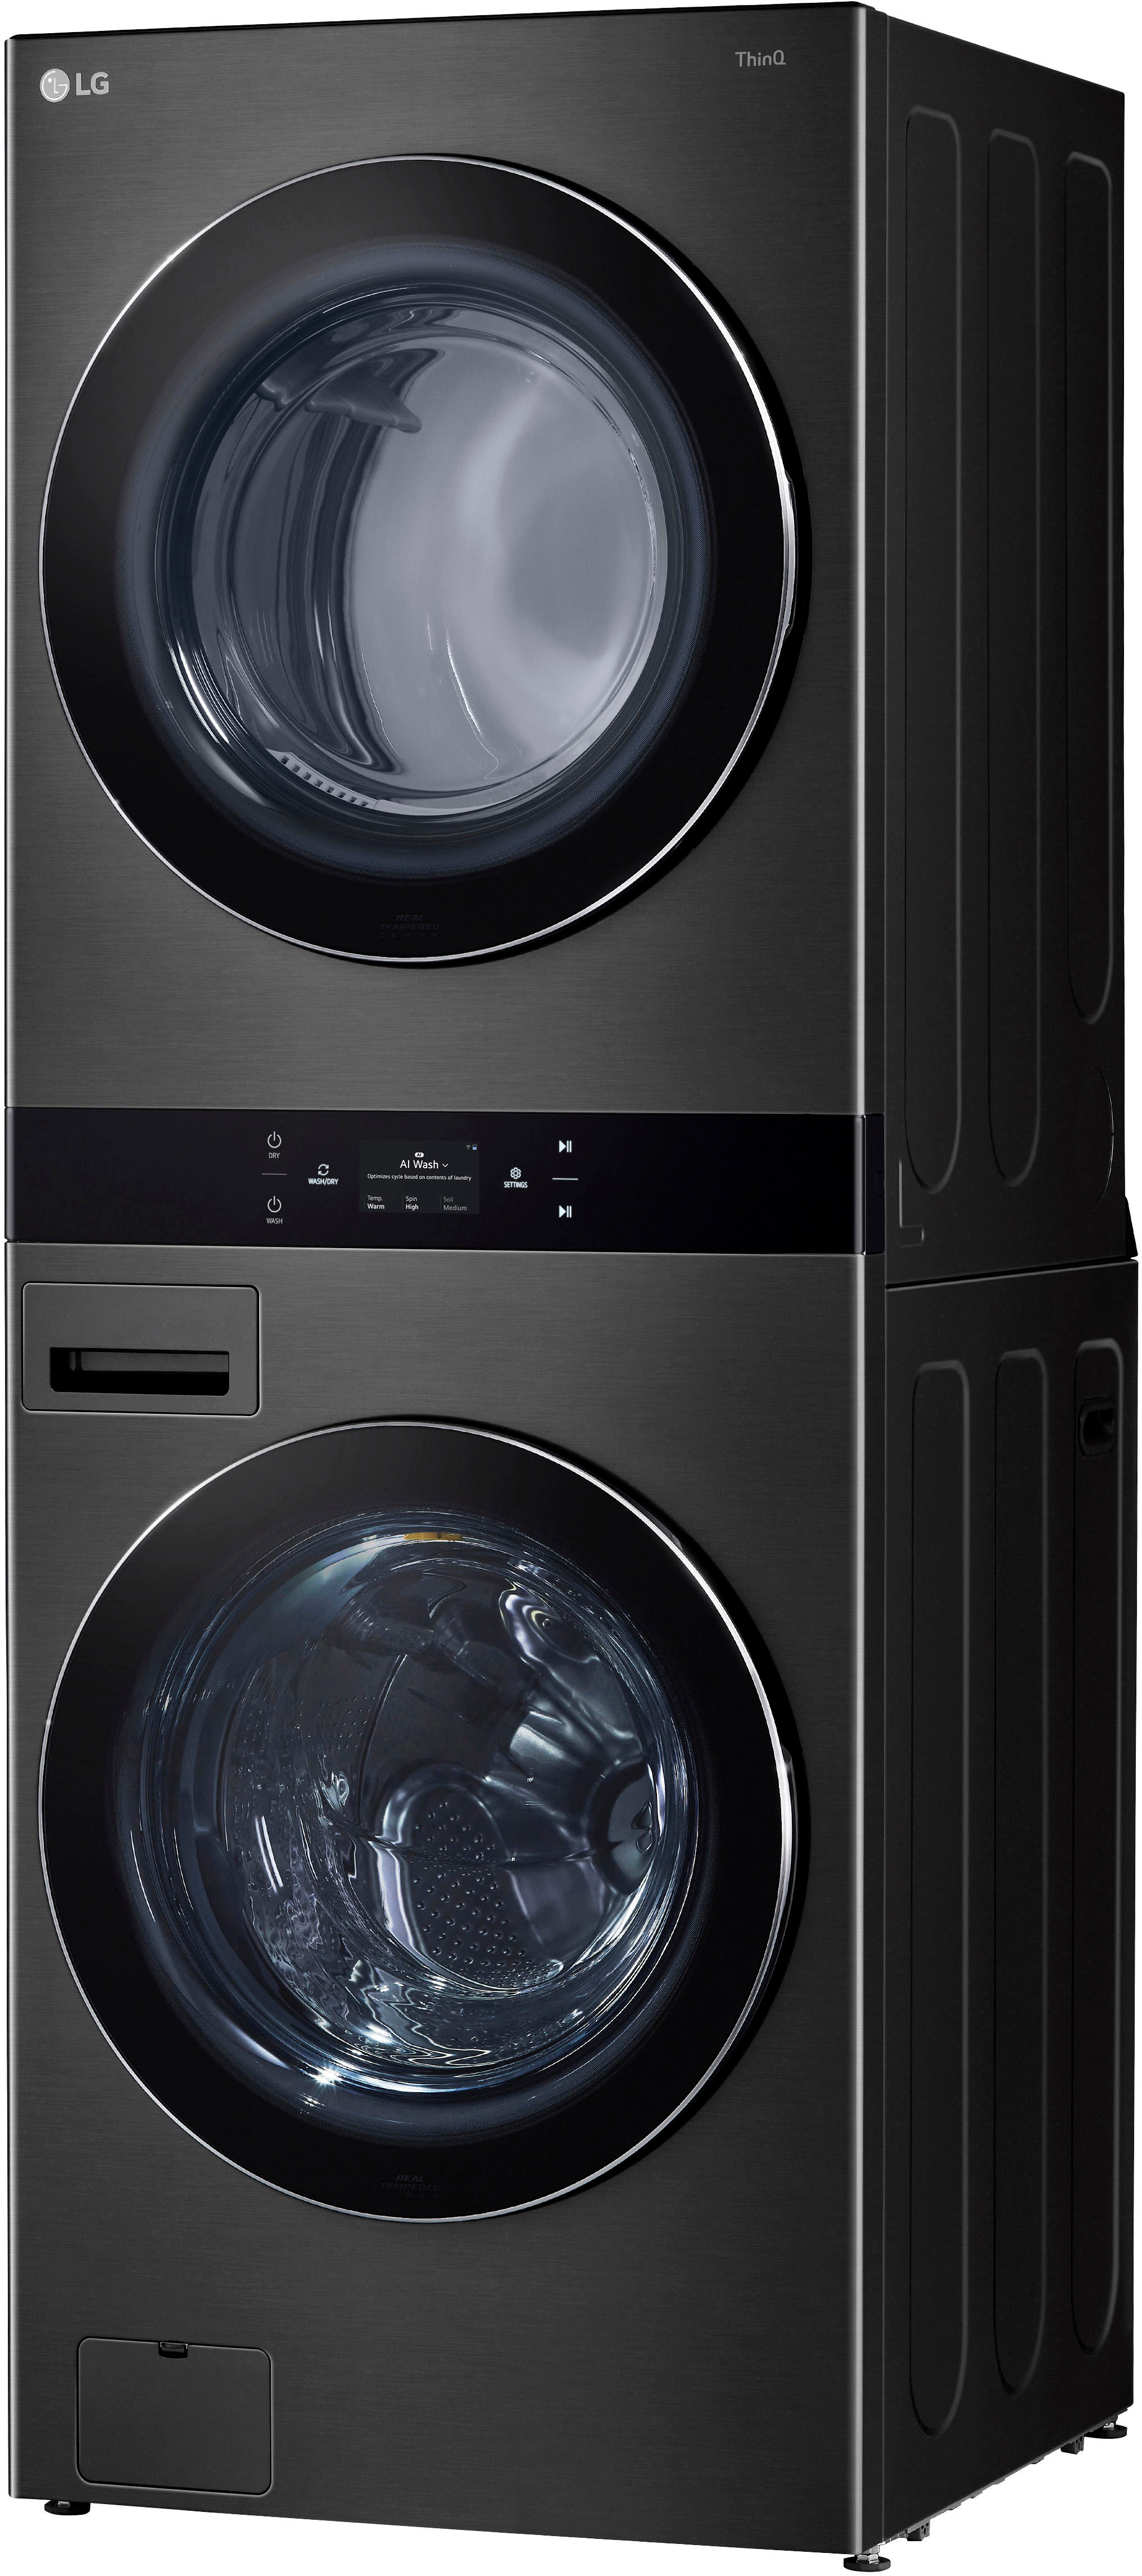 LG 5.0 Cu. Ft. HE Smart Front Load Washer and 7.4 Cu. Ft. Gas